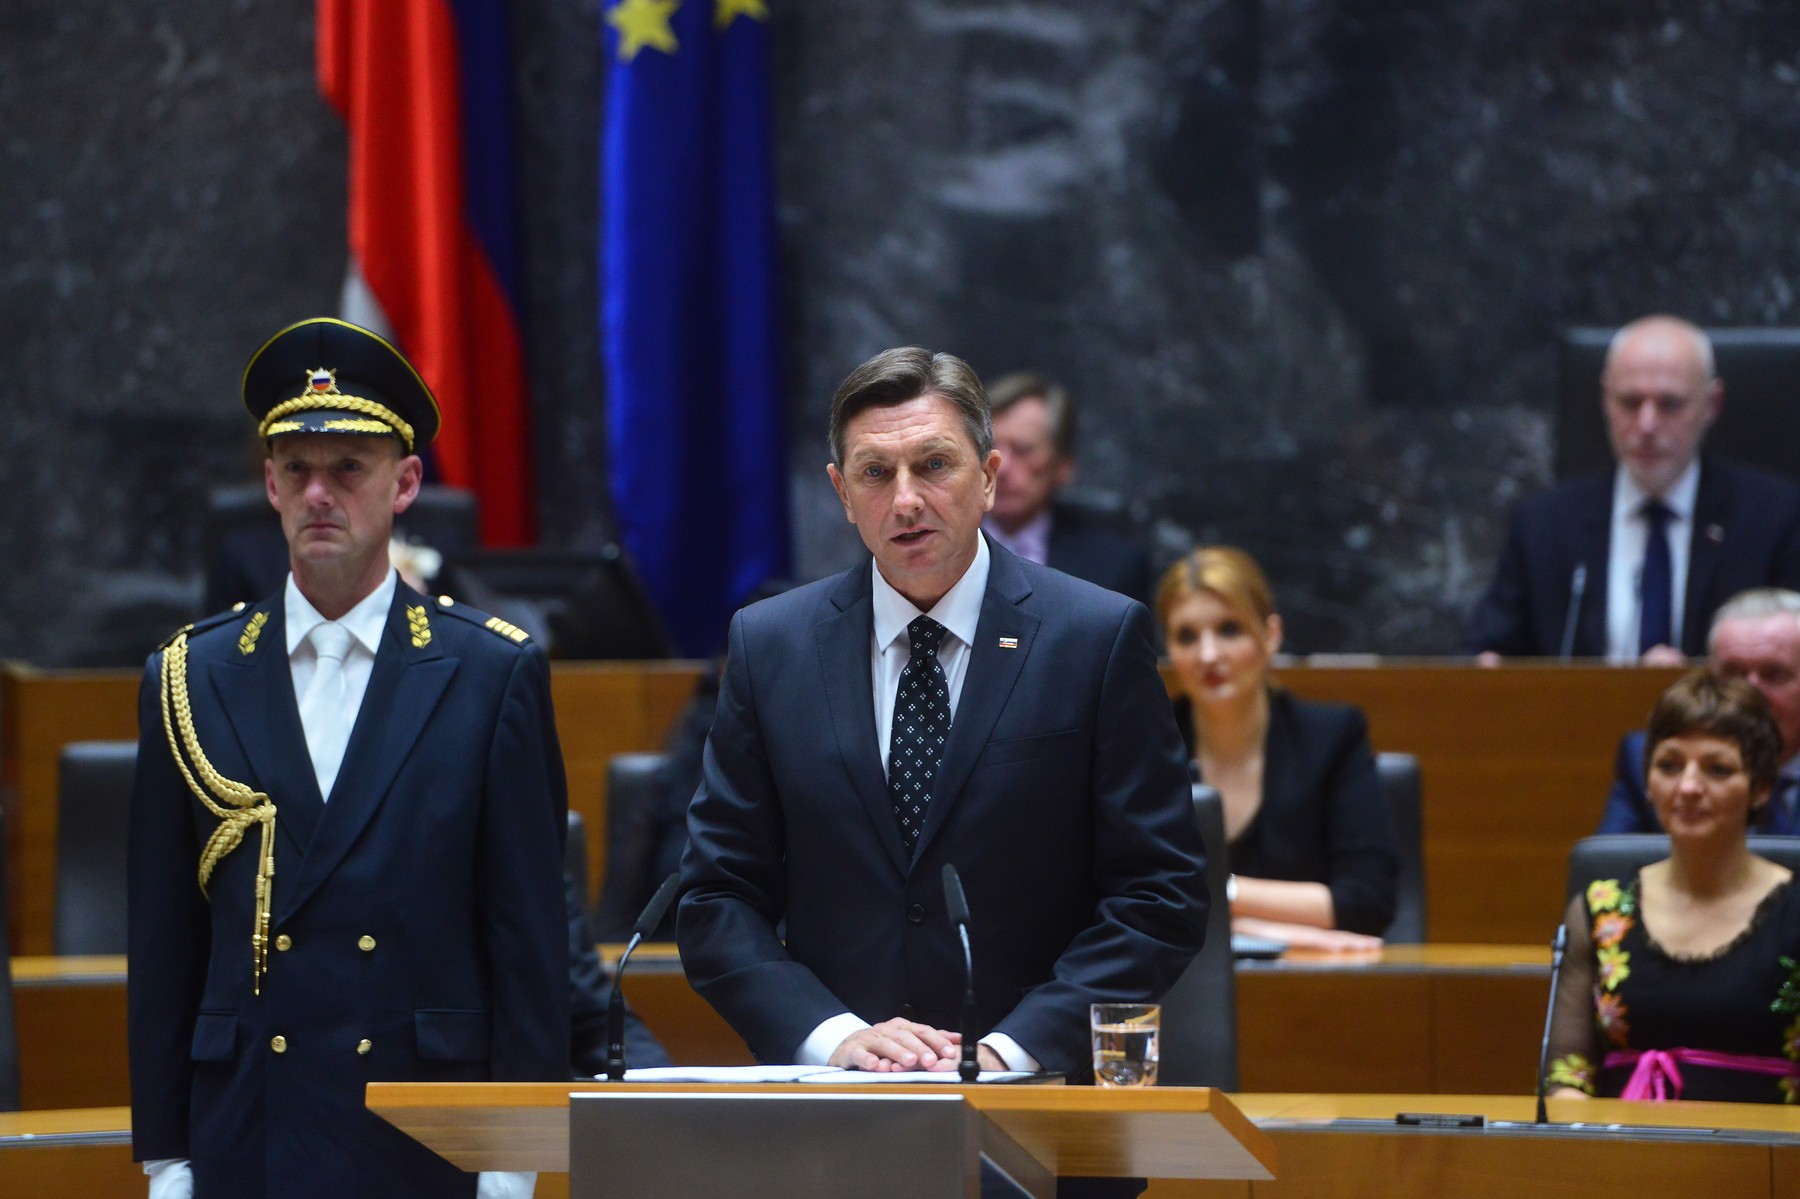 (171223) -- LJUBLJANA, Dec. 23, 2017 () -- President of the Republic of Slovenia, Borut Pahor (R front), swears in as president at a special National Assembly session in Ljubljana, Slovenia, Dec. 22, 2017. Slovenian President Borut Pahor was sowrn in at the National Assembly on Friday and will formally start his second five-year term on Saturday, the Slovenian Press Agency (STA) reported., Image: 358518085, License: Rights-managed, Restrictions: WORLD RIGHTS excluding China - Fee Payable Upon Reproduction - For queries contact Avalon.red - sales@photoshot.com  London: +44 (0) 20 7421 6000  Los Angeles: +1 (310) 822 0419  Madrid: +34 91 533 4289, Model Release: no, Credit line: Matic Stojs / Avalon Editorial / Profimedia